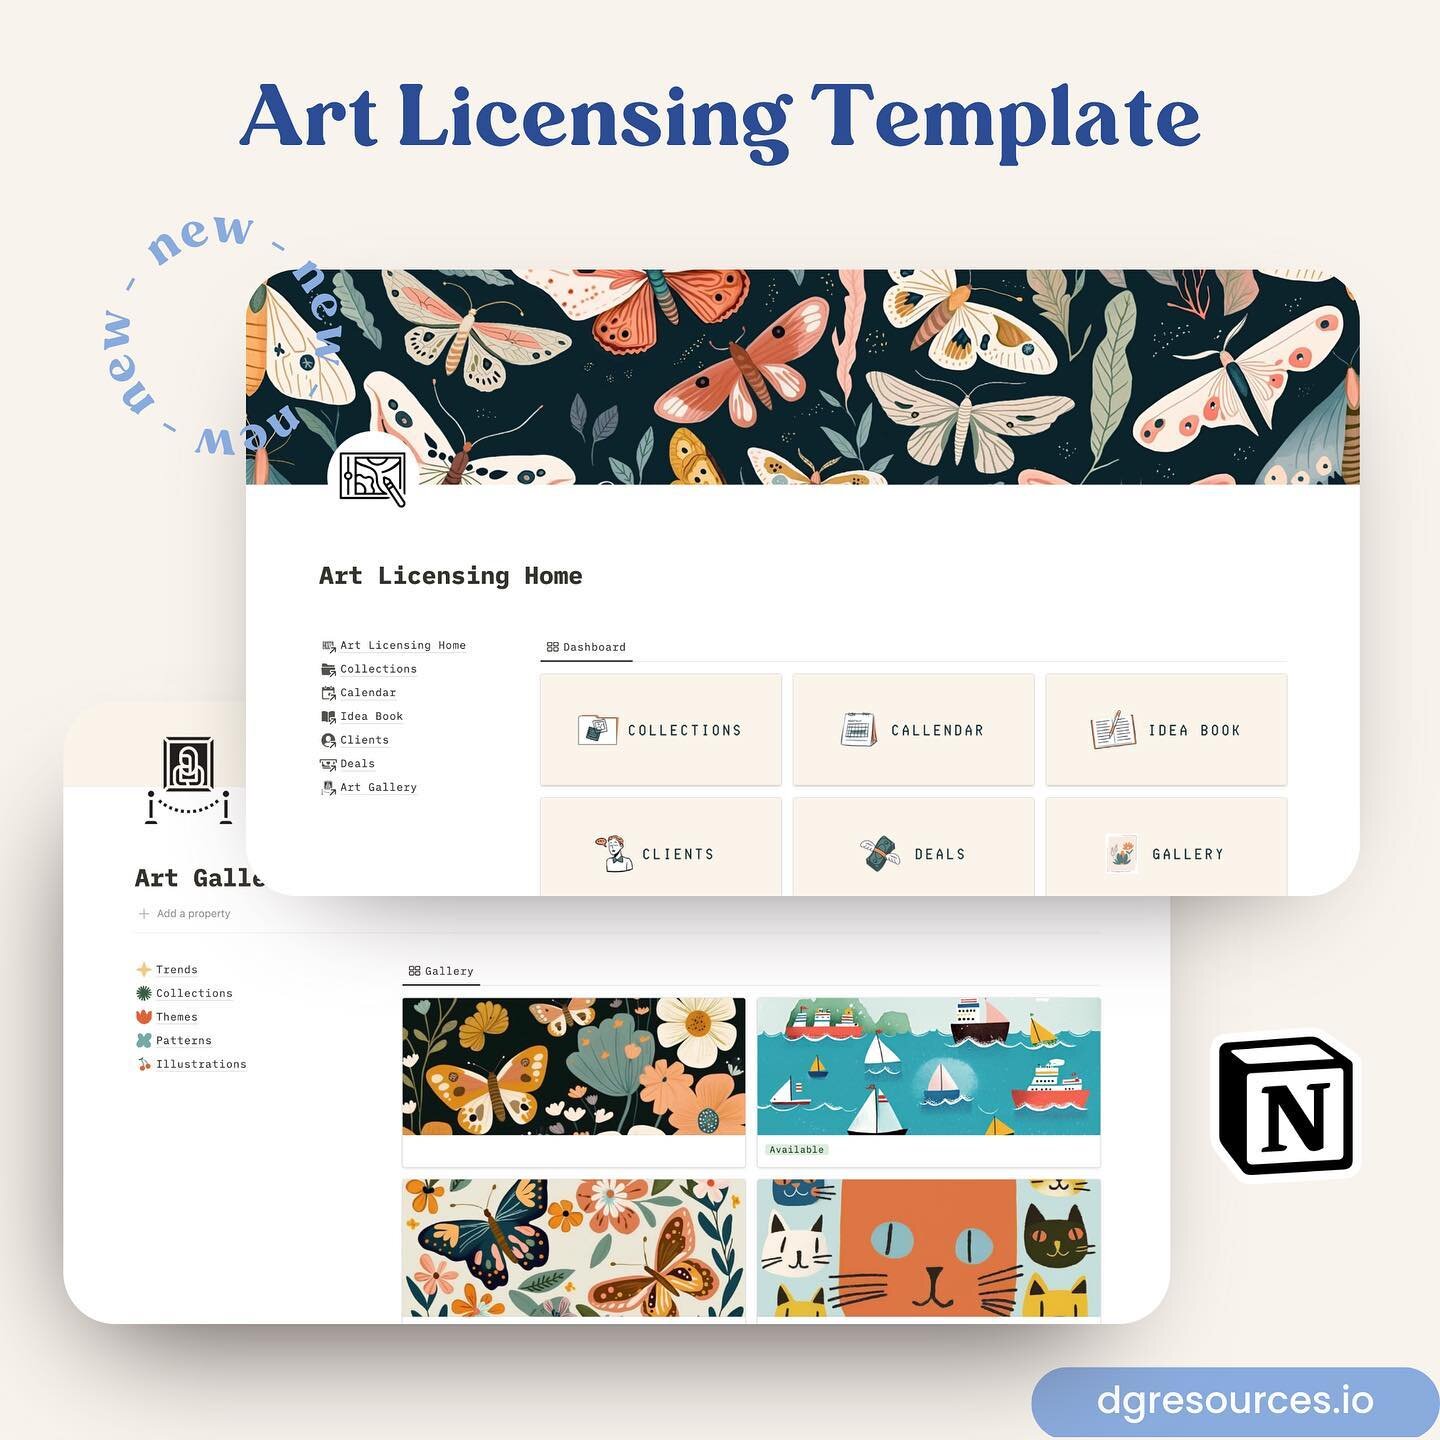 Have you seen our latest Notion template -  the Art Licensing Dashboard! It's an intuitive solution to manage multiple clients, themes, and projects with ease. Organize your ideas, licensing collections, and showcase your work in a private gallery fo